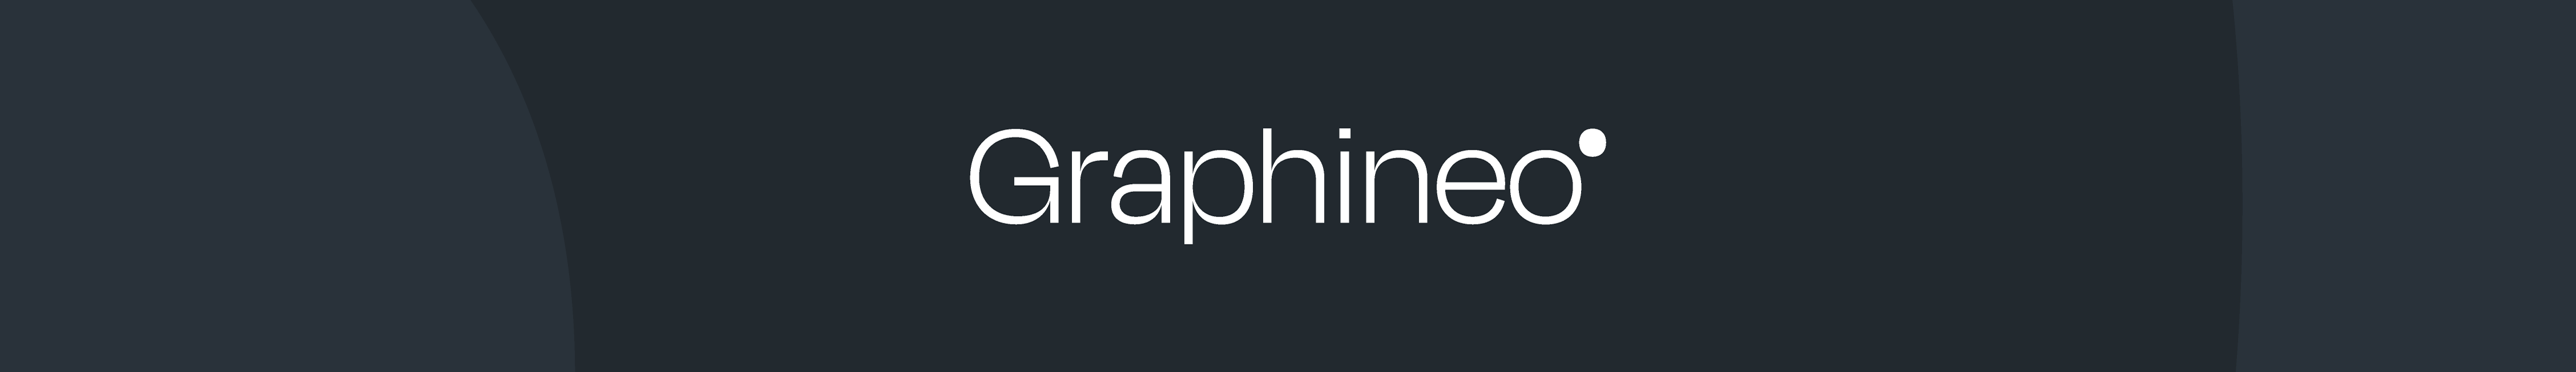 Agence Graphineo's profile banner